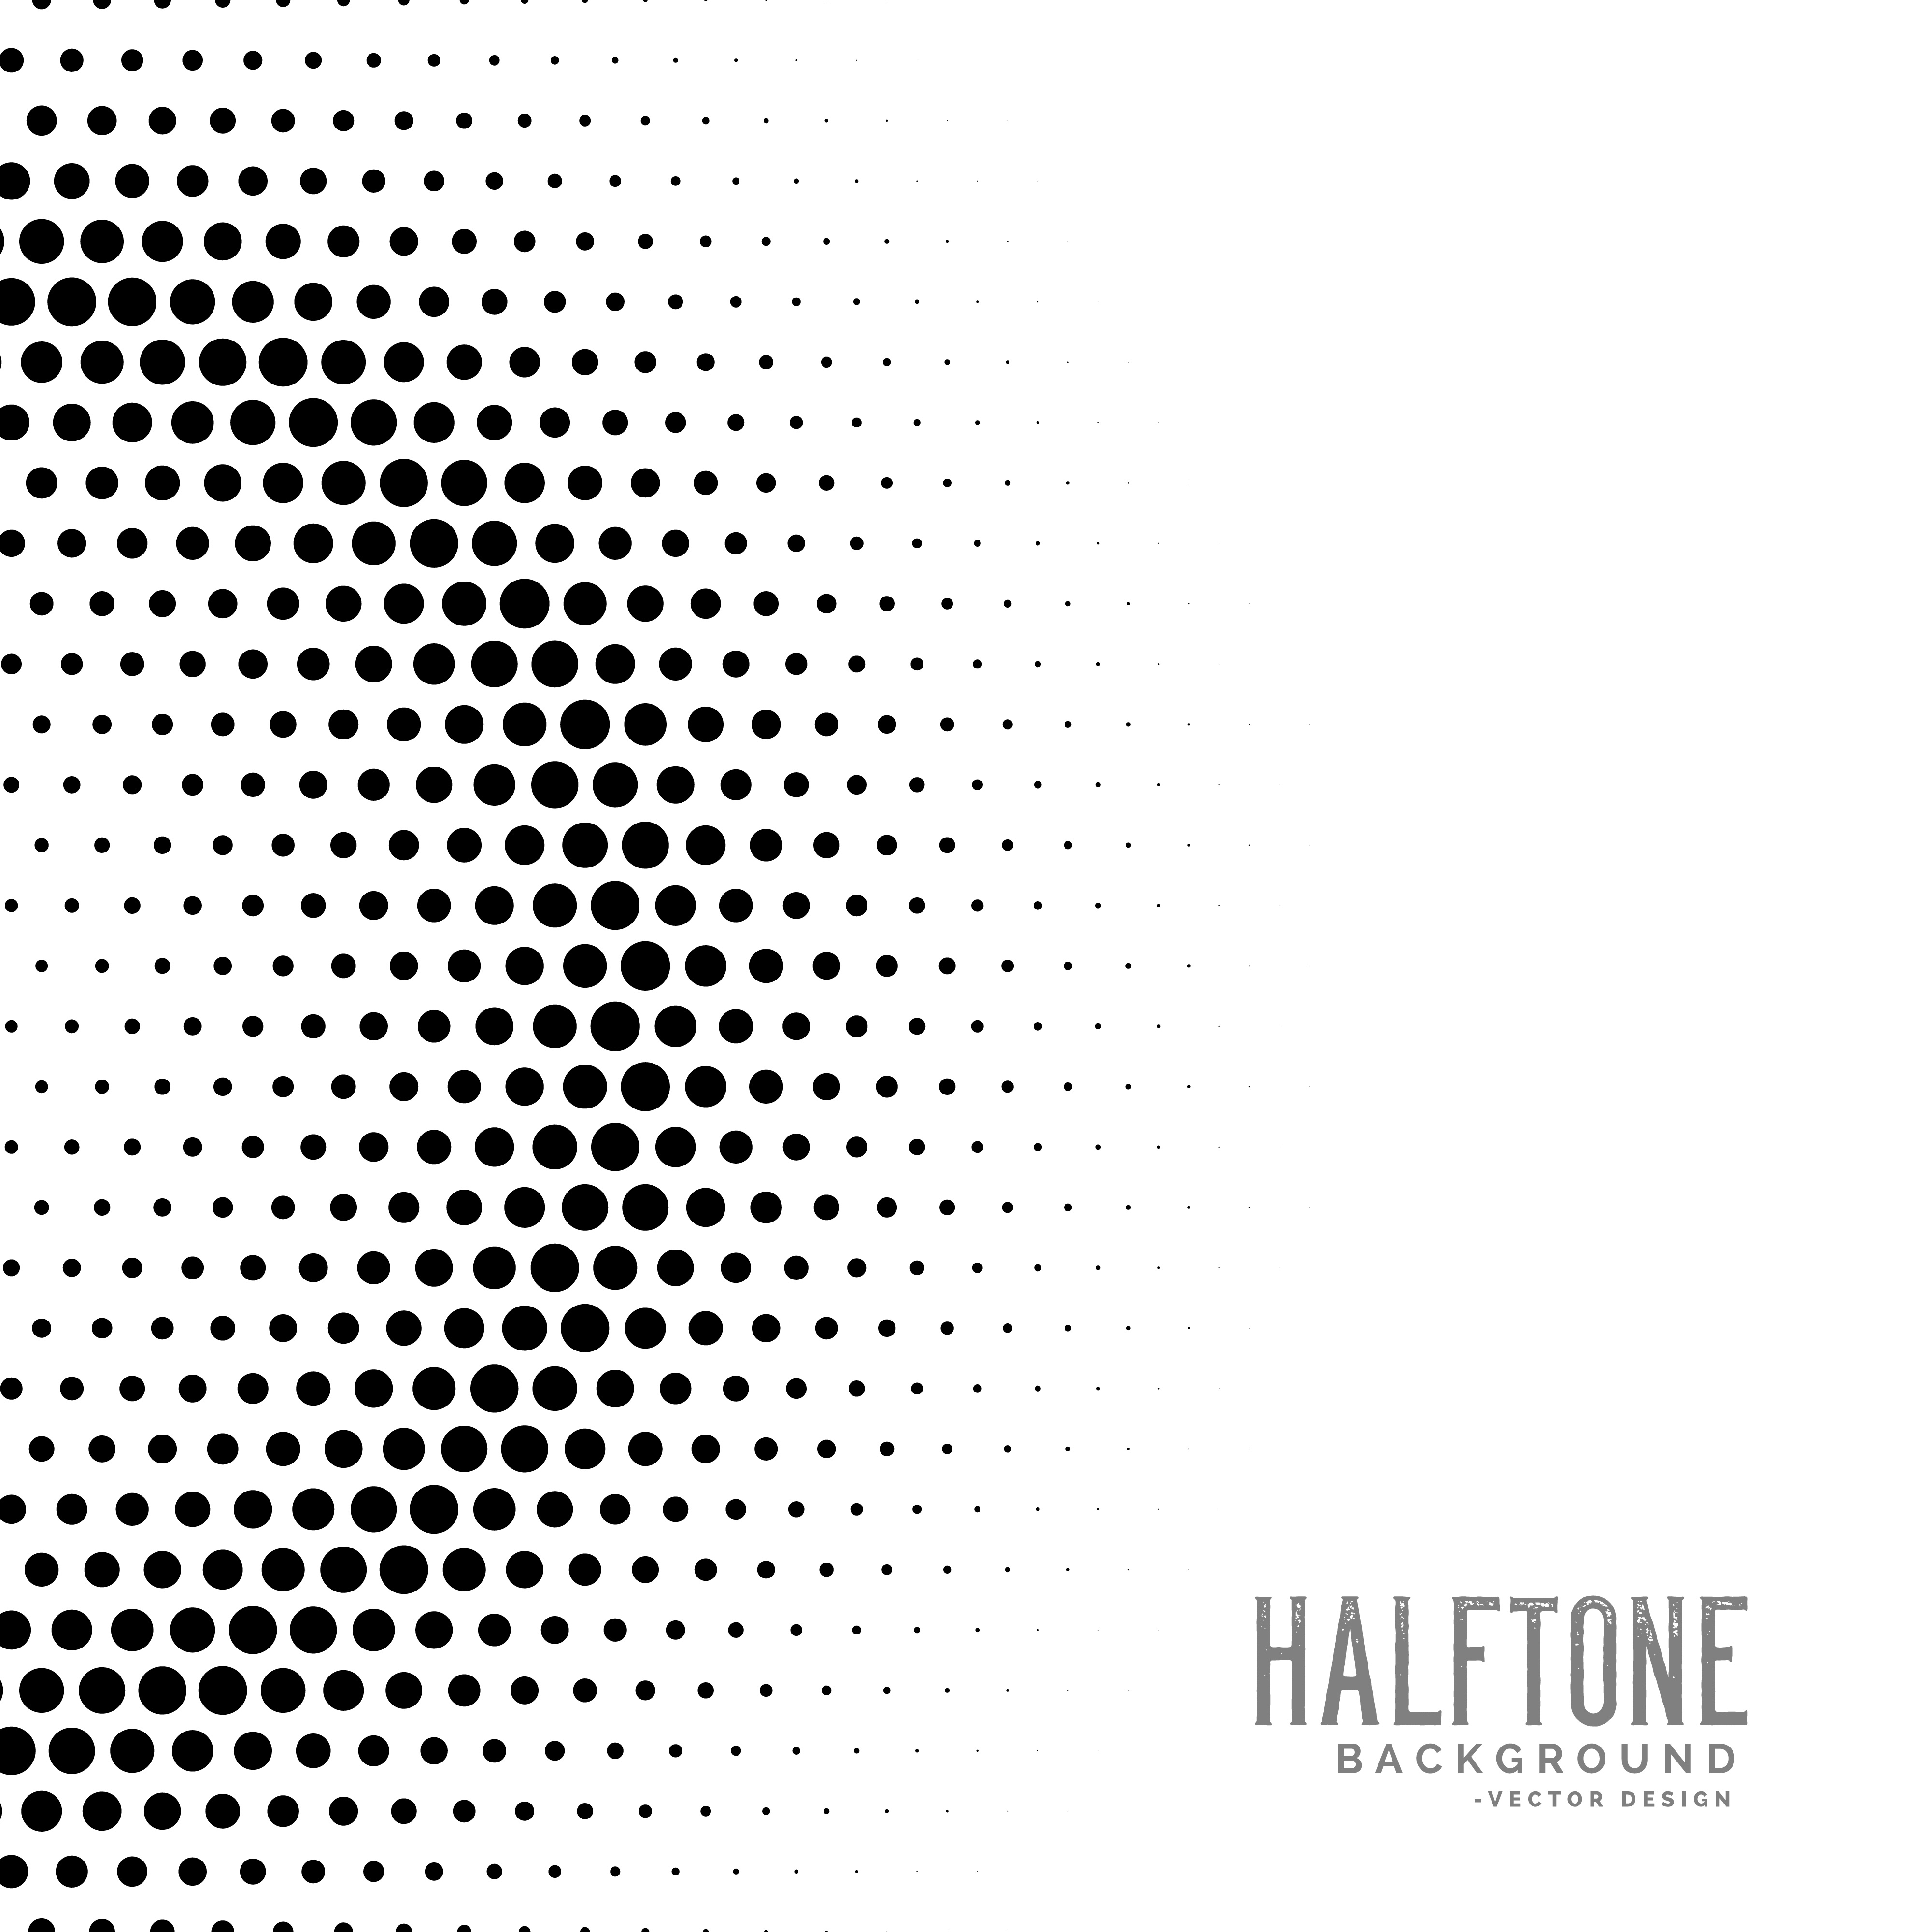 halftone gradient circles dot background - Download Free Vector Art ...